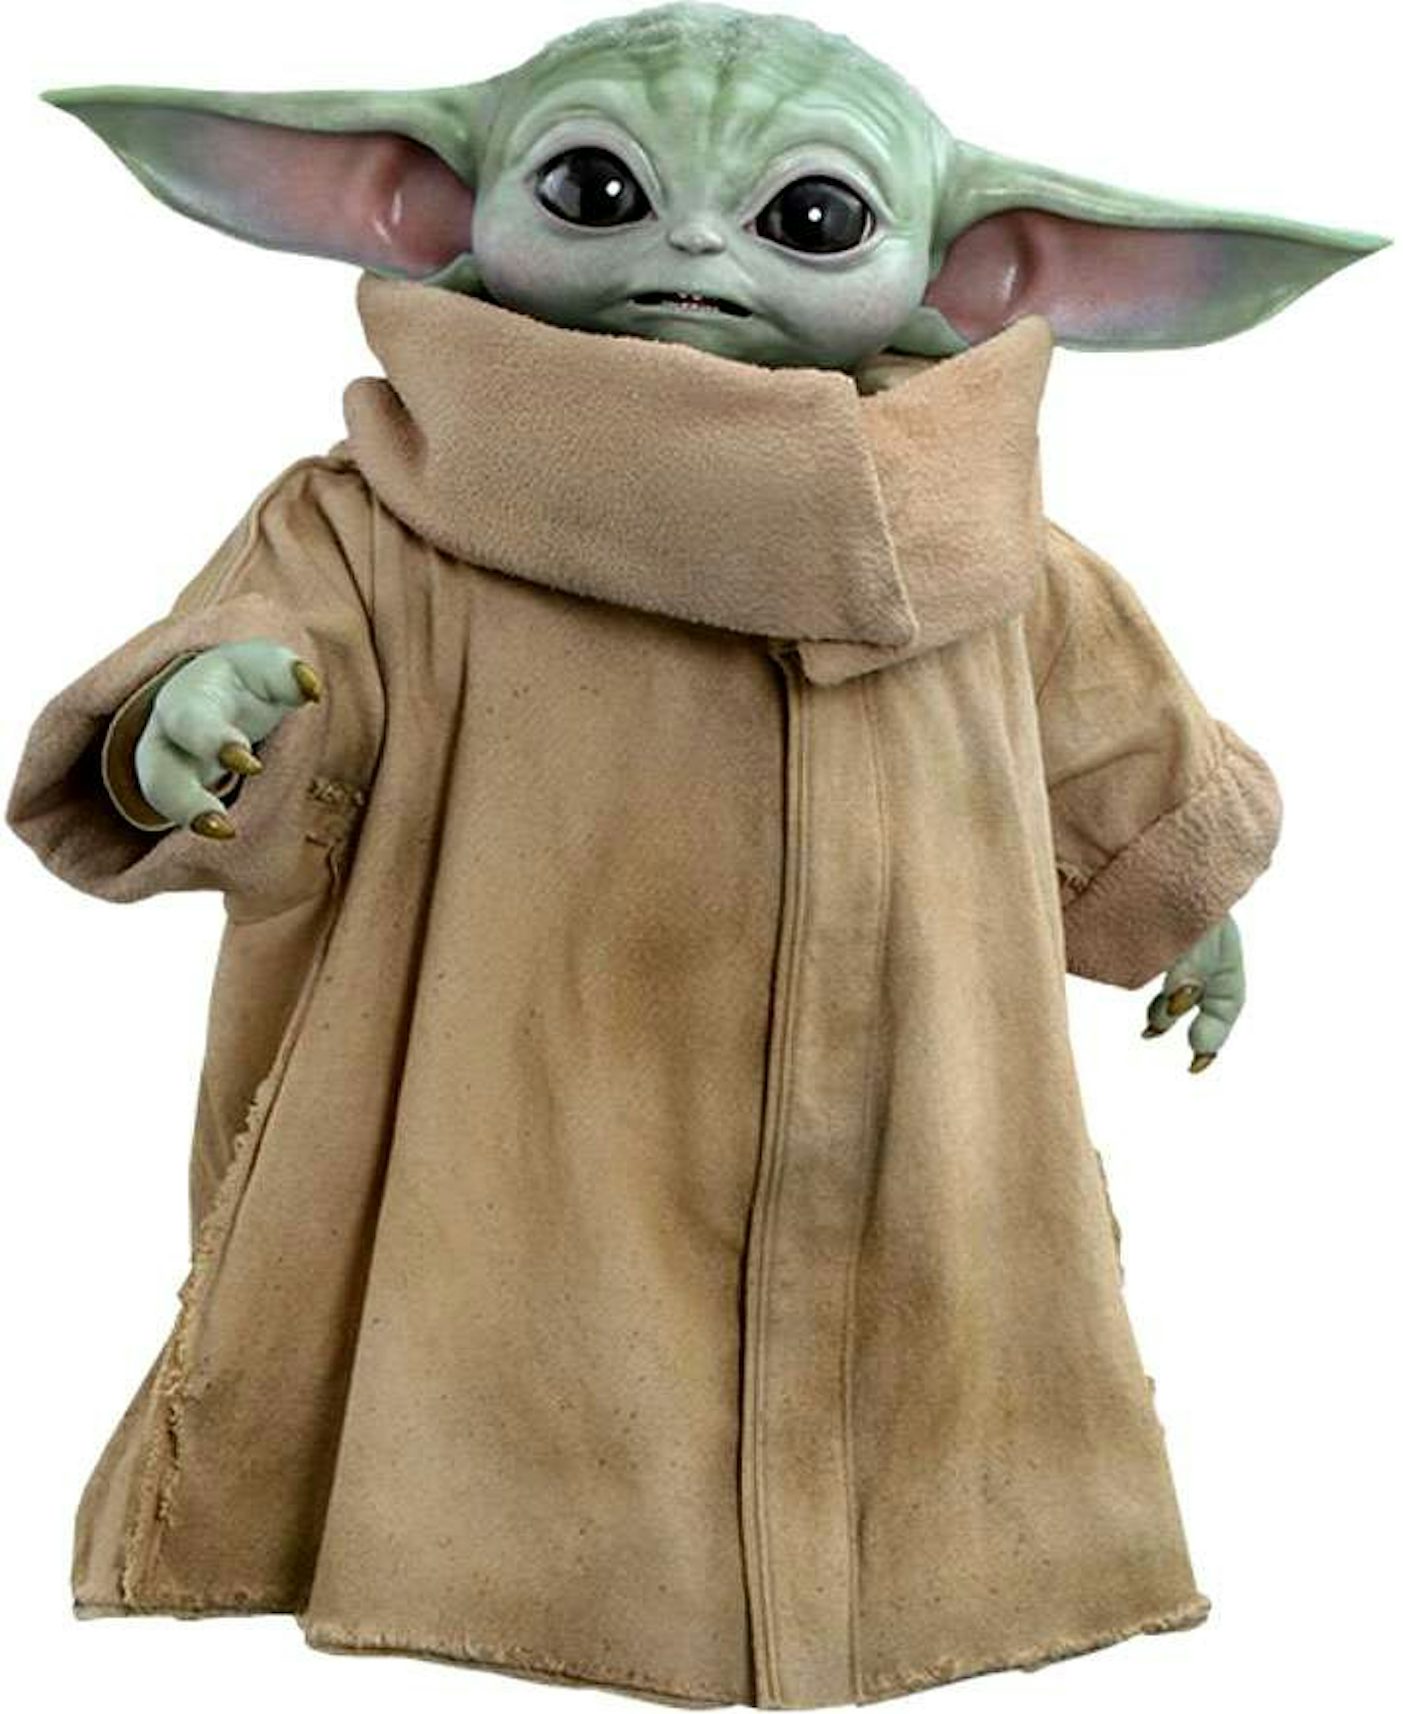 https://images.stockx.com/images/Hot-Toys-Star-Wars-The-Mandalorian-The-Child-Baby-Yoda-Grogu-Non-Refundable-Down-Payment-Life-Size-Collectible-Figure.jpg?fit=fill&bg=FFFFFF&w=1200&h=857&fm=jpg&auto=compress&dpr=2&trim=color&updated_at=1656472547&q=60